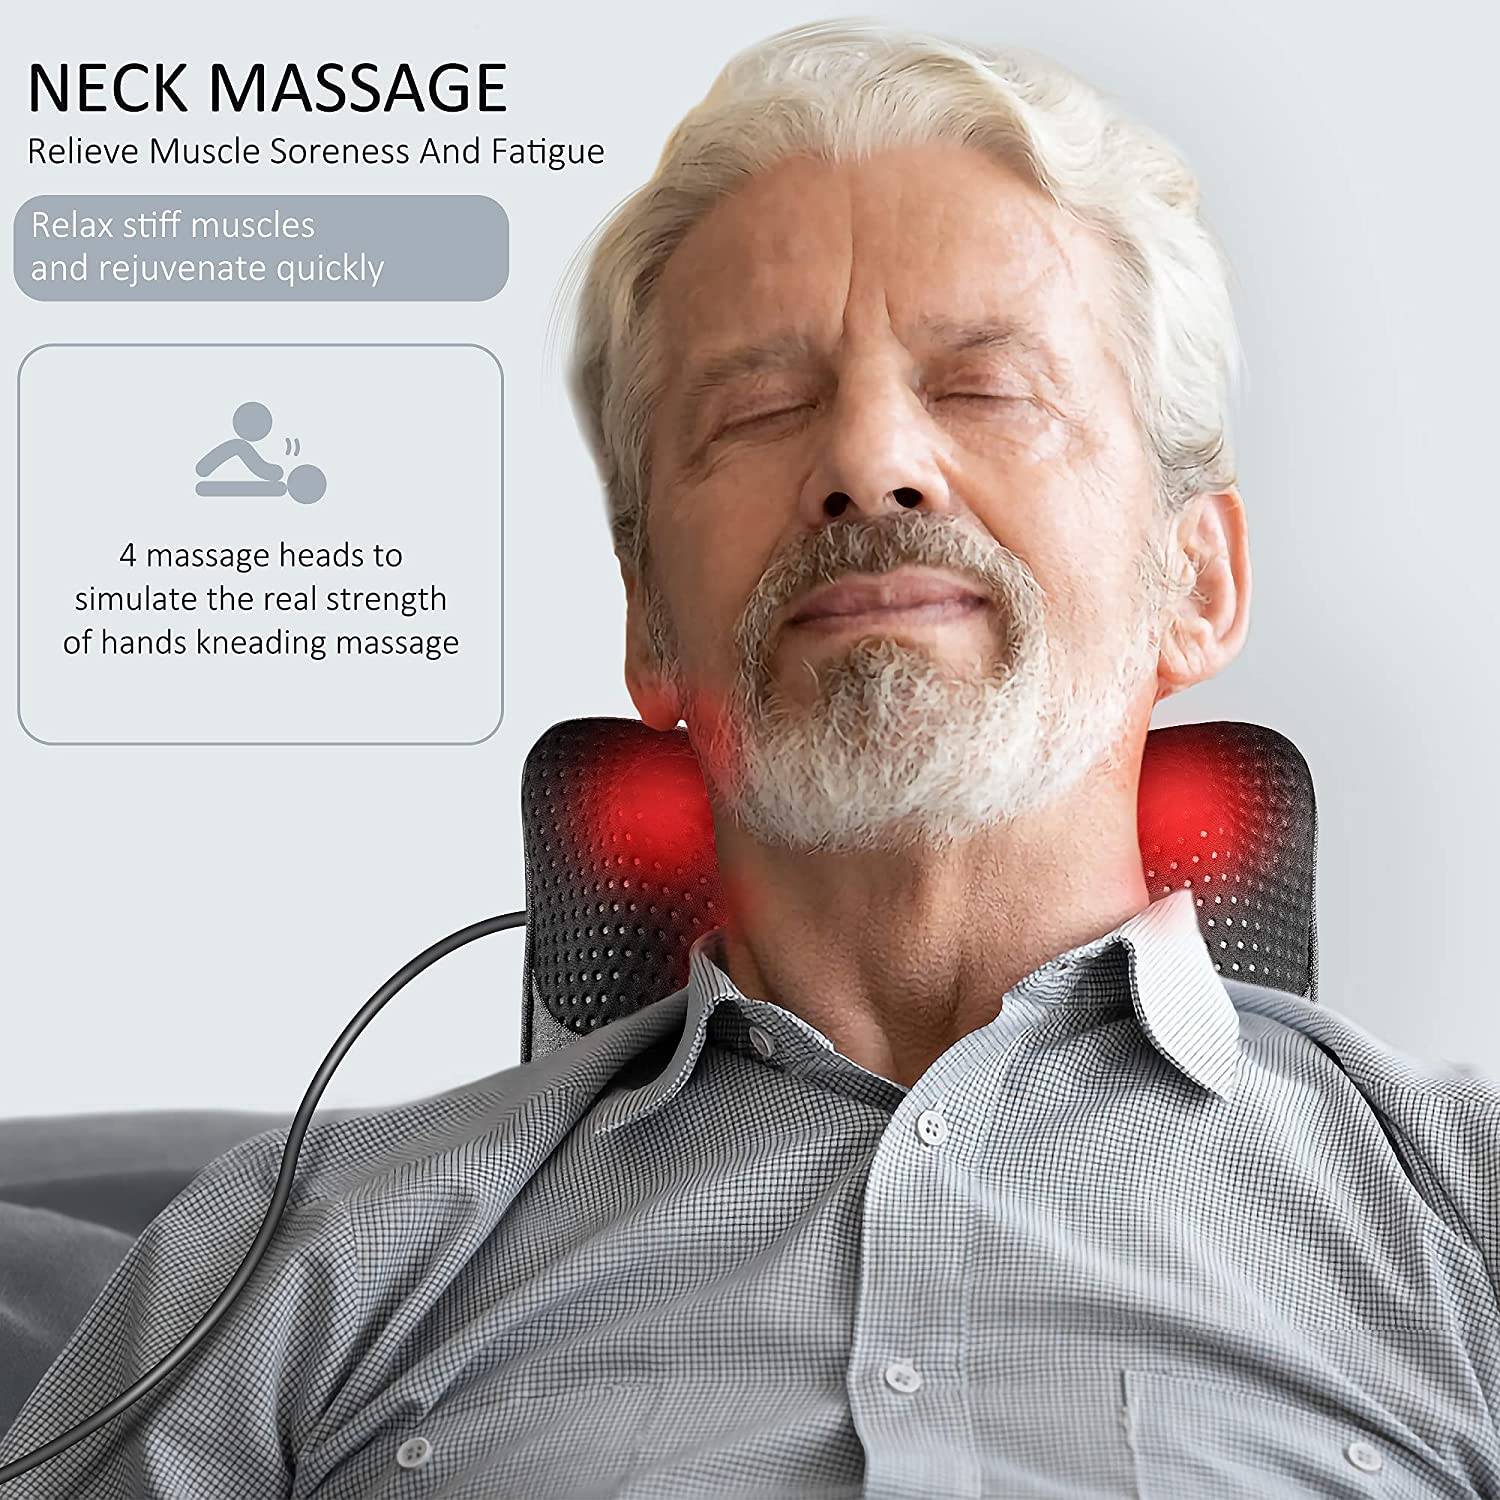 Edward Creations this neck massager is perfect for those who suffer from tension headaches or neck pain using heat function